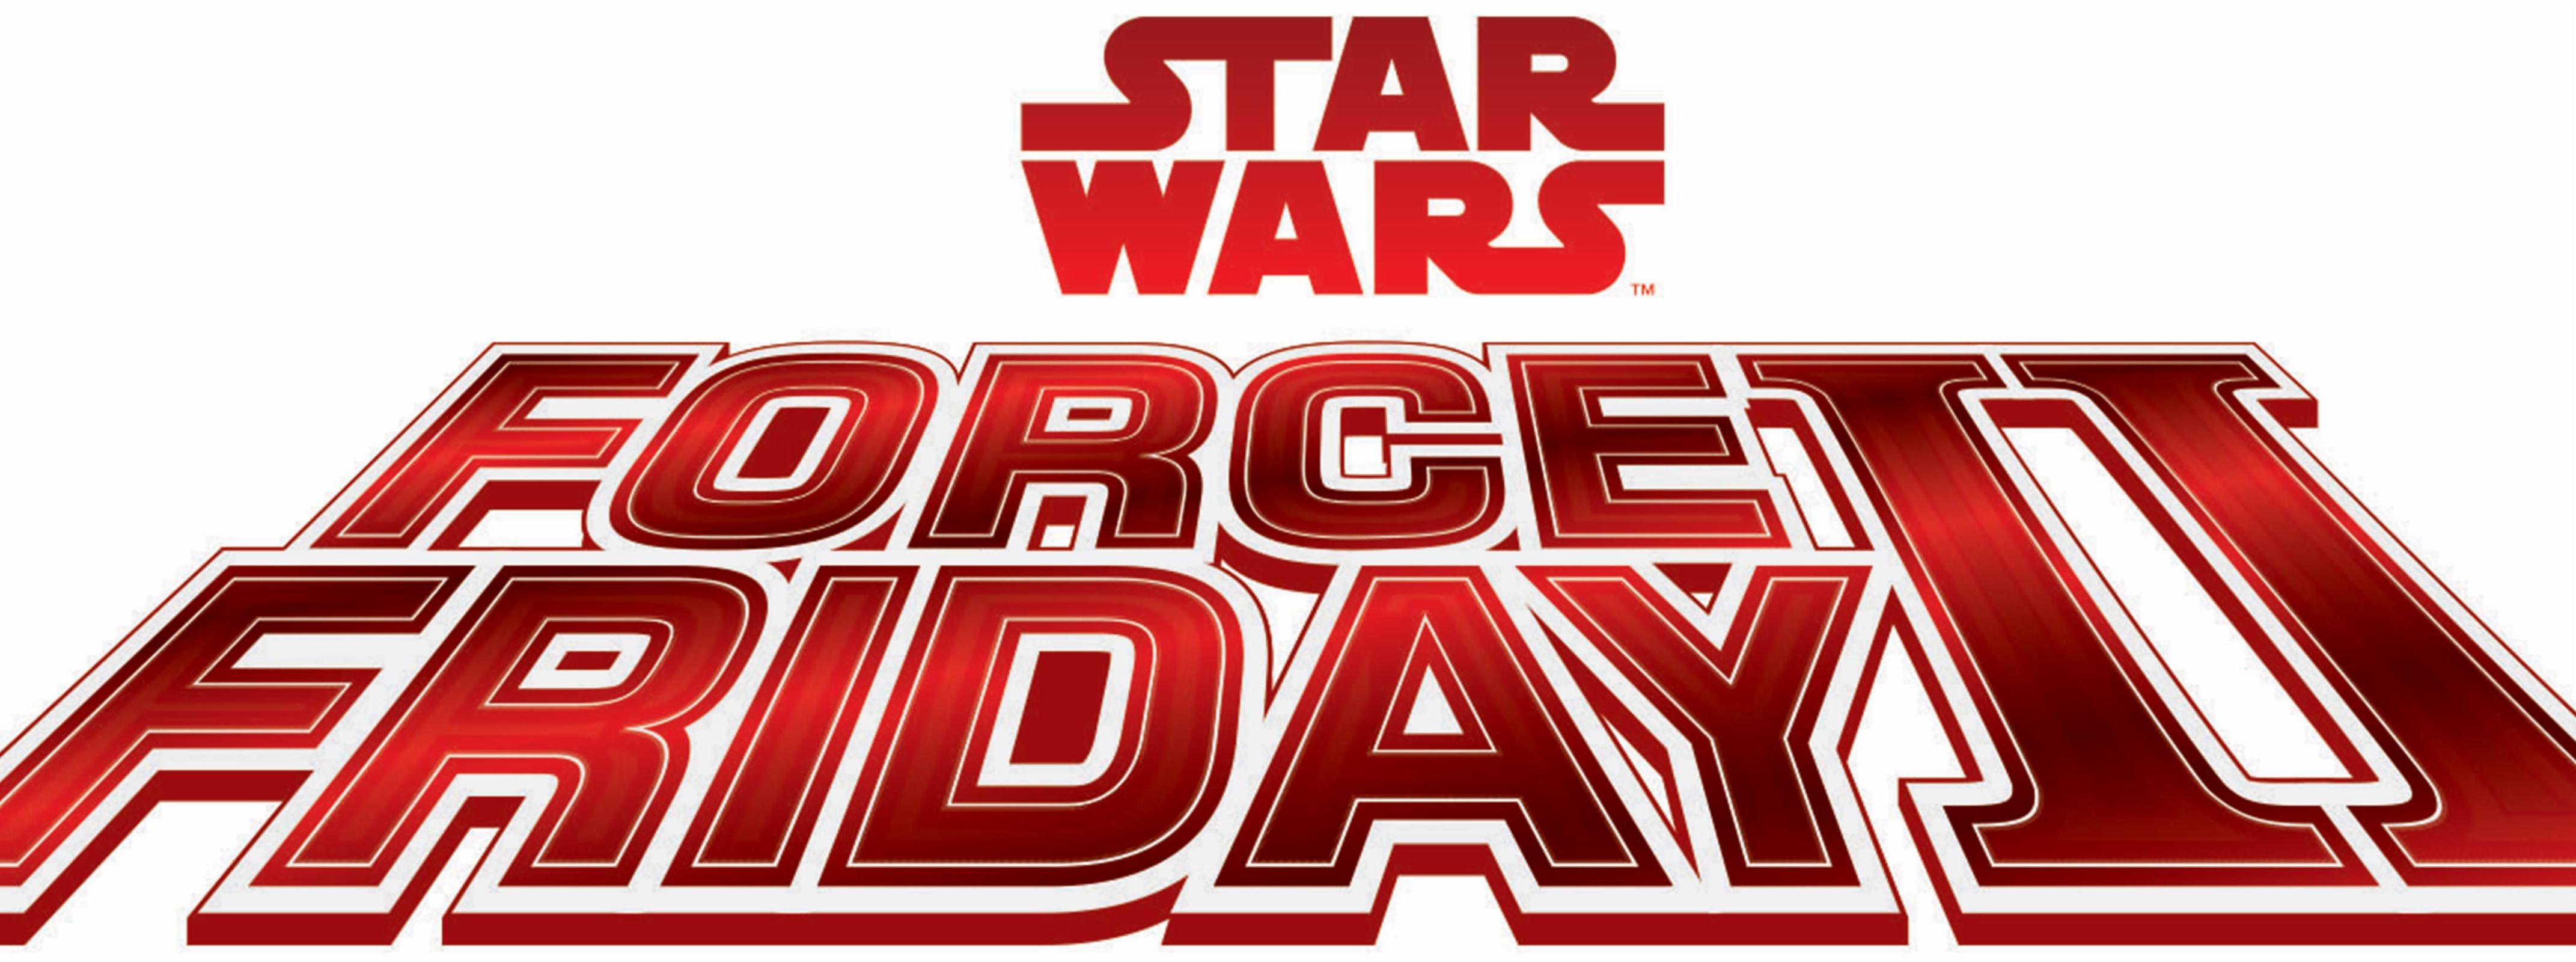 Star Wars Toys and Gifts from Force Friday II